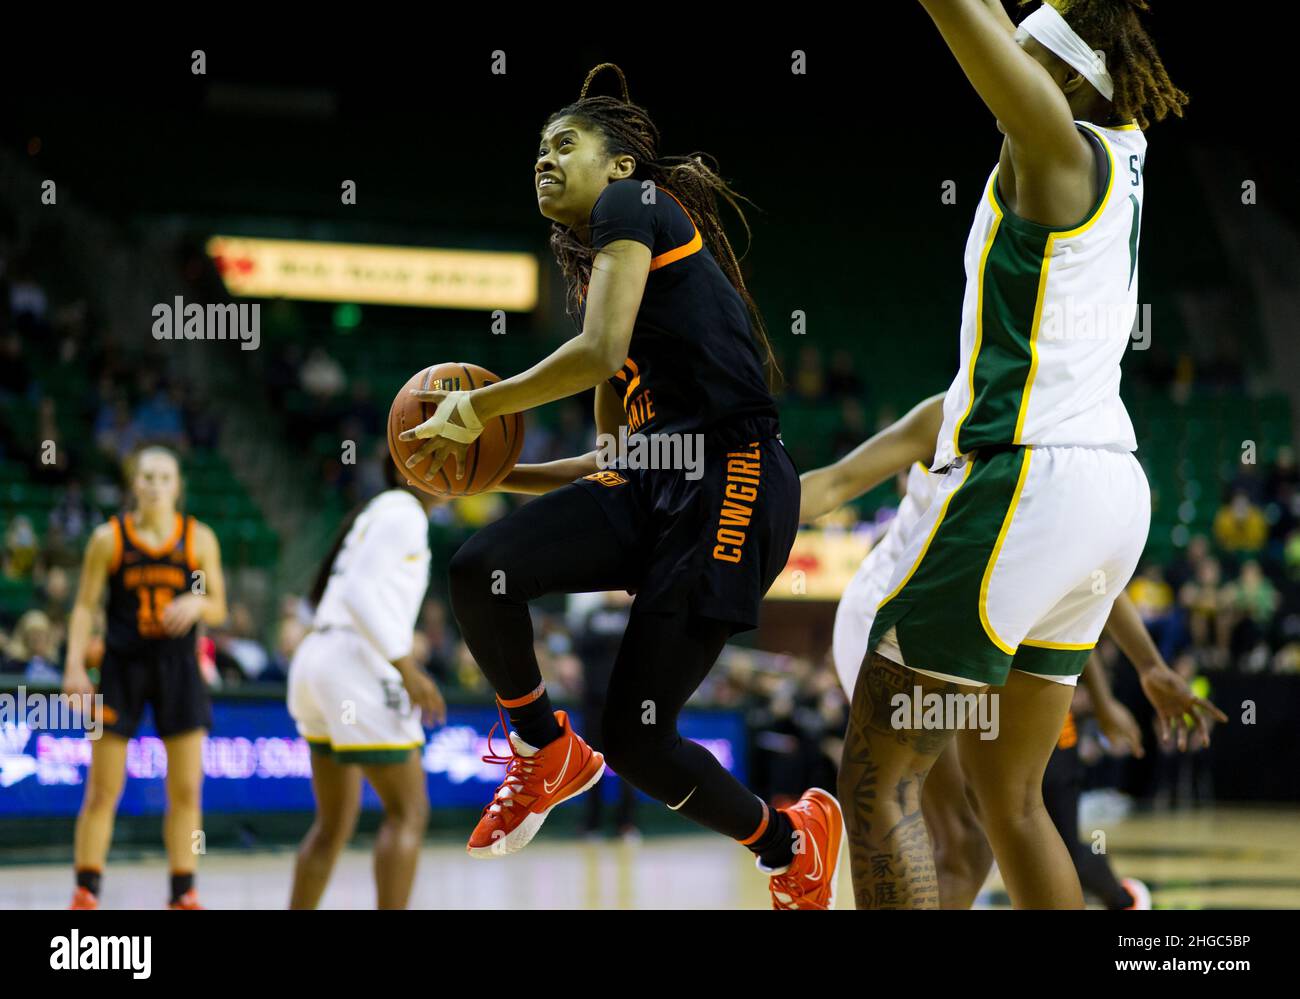 Waco, Texas, USA. 19th Jan, 2022. Oklahoma State Cowgirls guard N'Yah Boyd (11) shoots the ball during the 2nd quarter of the NCAA Basketball game between the Oklahoma State Cowgirls and Baylor Lady Bears at Ferrell Center in Waco, Texas. Matthew Lynch/CSM/Alamy Live News Stock Photo